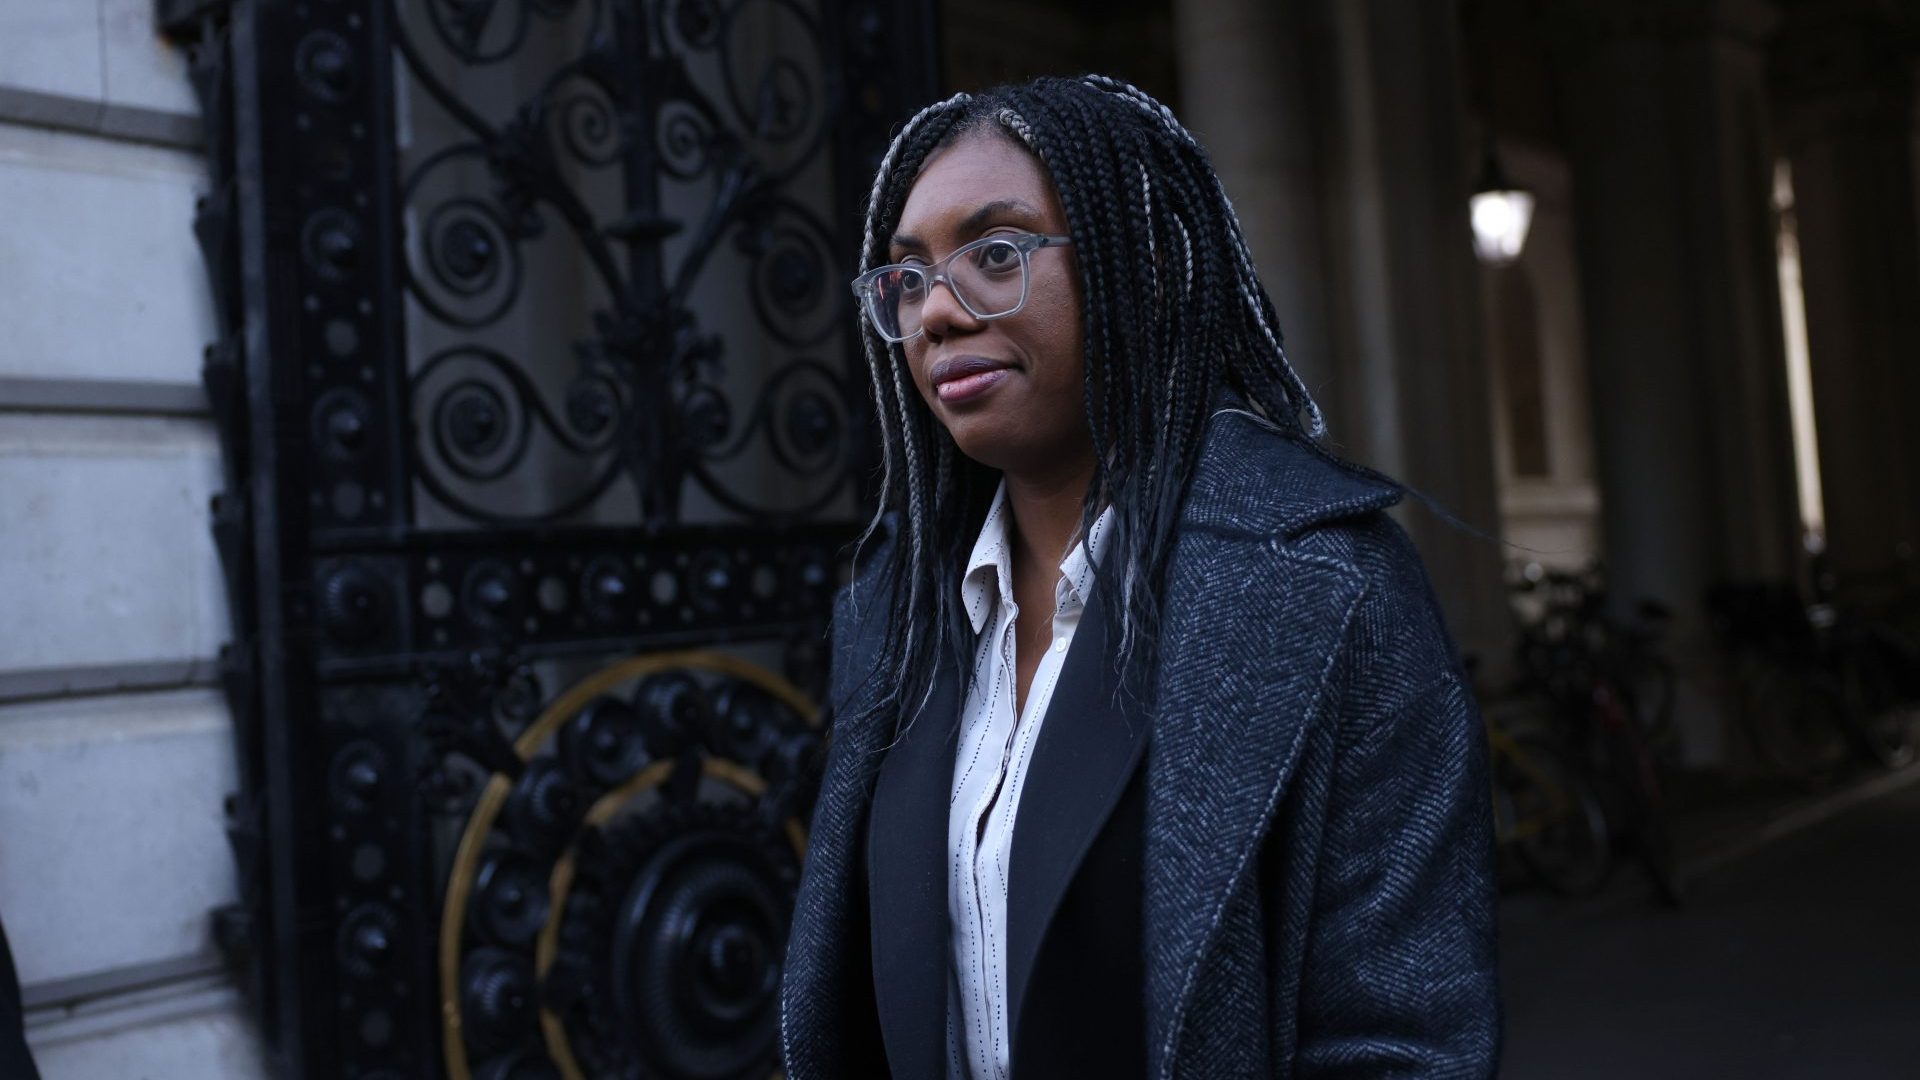 Kemi Badenoch arrives to attend cabinet on February 7 (Photo by Dan Kitwood/Getty Images)